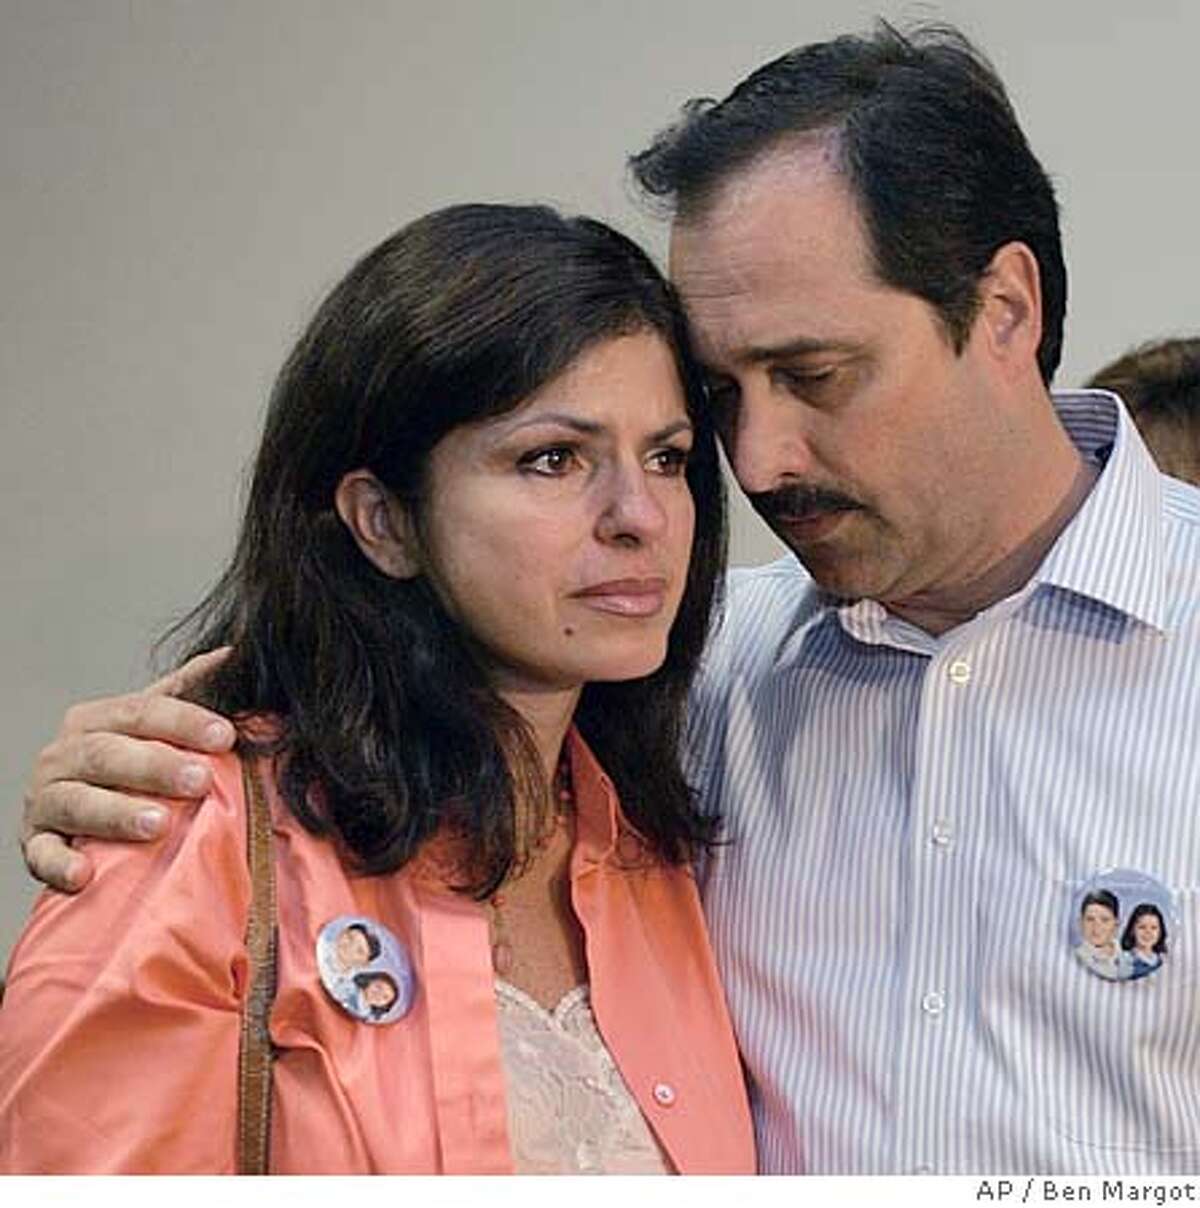 Bob Pack embraces his wife Carmen after emerging from a courtroom Friday, June 24, 2005, in Martinez, Calif. Nanny Jimena Barreto was sentenced Friday to 30 years to life in prison after being convicted last month of murder in the hit-and-run deaths of the Pack's two children. Barreto, 46, got down on her knees and sobbed as she read a two-page letter expressing her remorse for the deaths of Troy Pack, 10, and his sister, Alana, 7. The children were riding a scooter and a bike on their way to get Slurpees with their mother and friends. (AP Photo/Ben Margot)